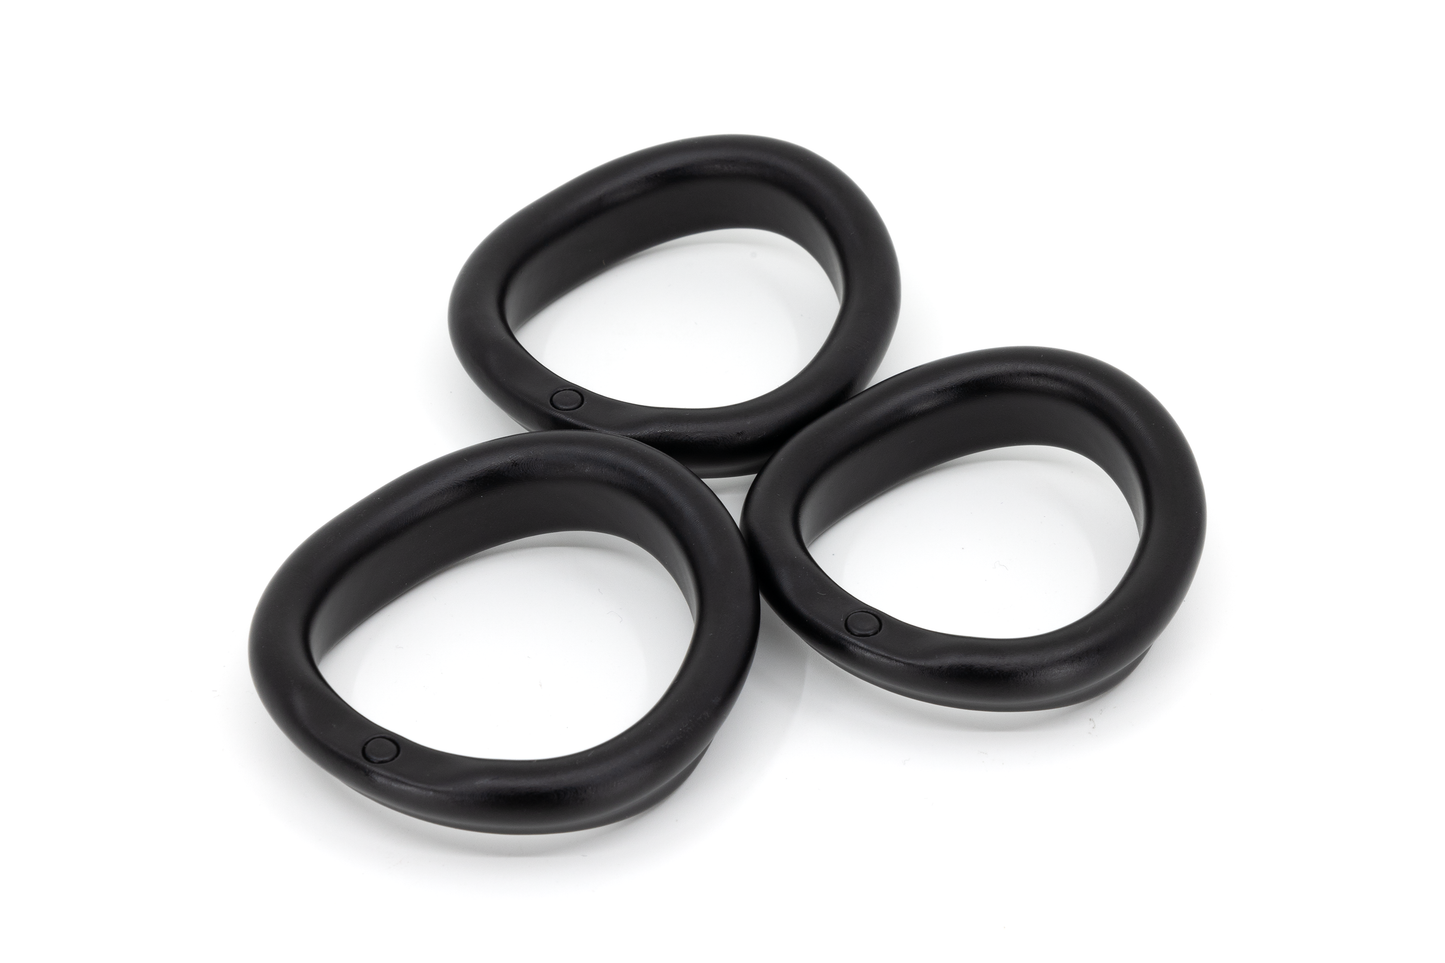 Mk1 Cock Ring Pack (50, 52, 54mm) - XX-Large